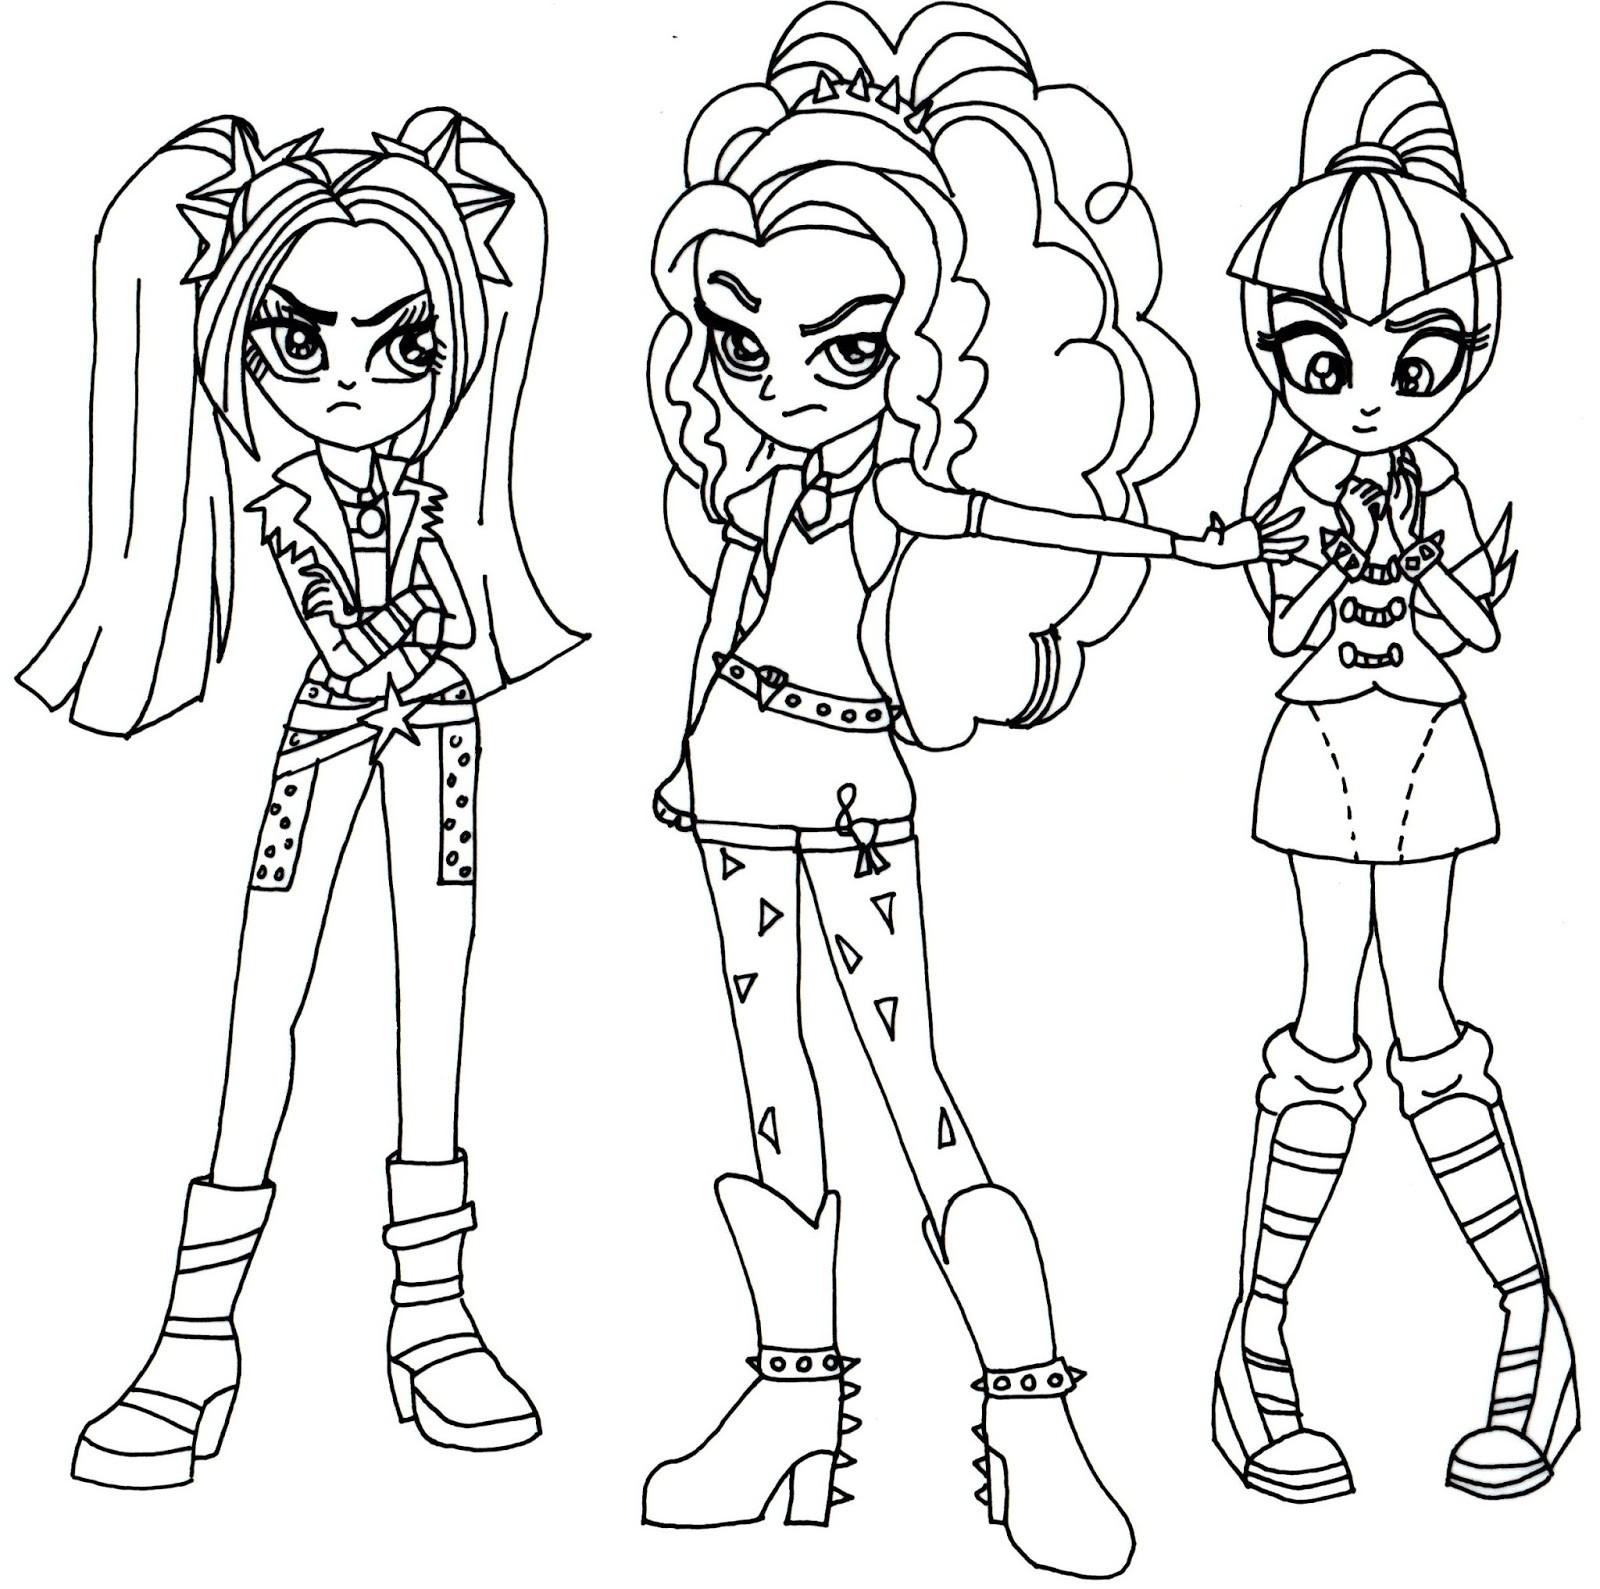 Coloring Pages Equestria Girls
 Free Printable My Little Pony Coloring Pages Villain in